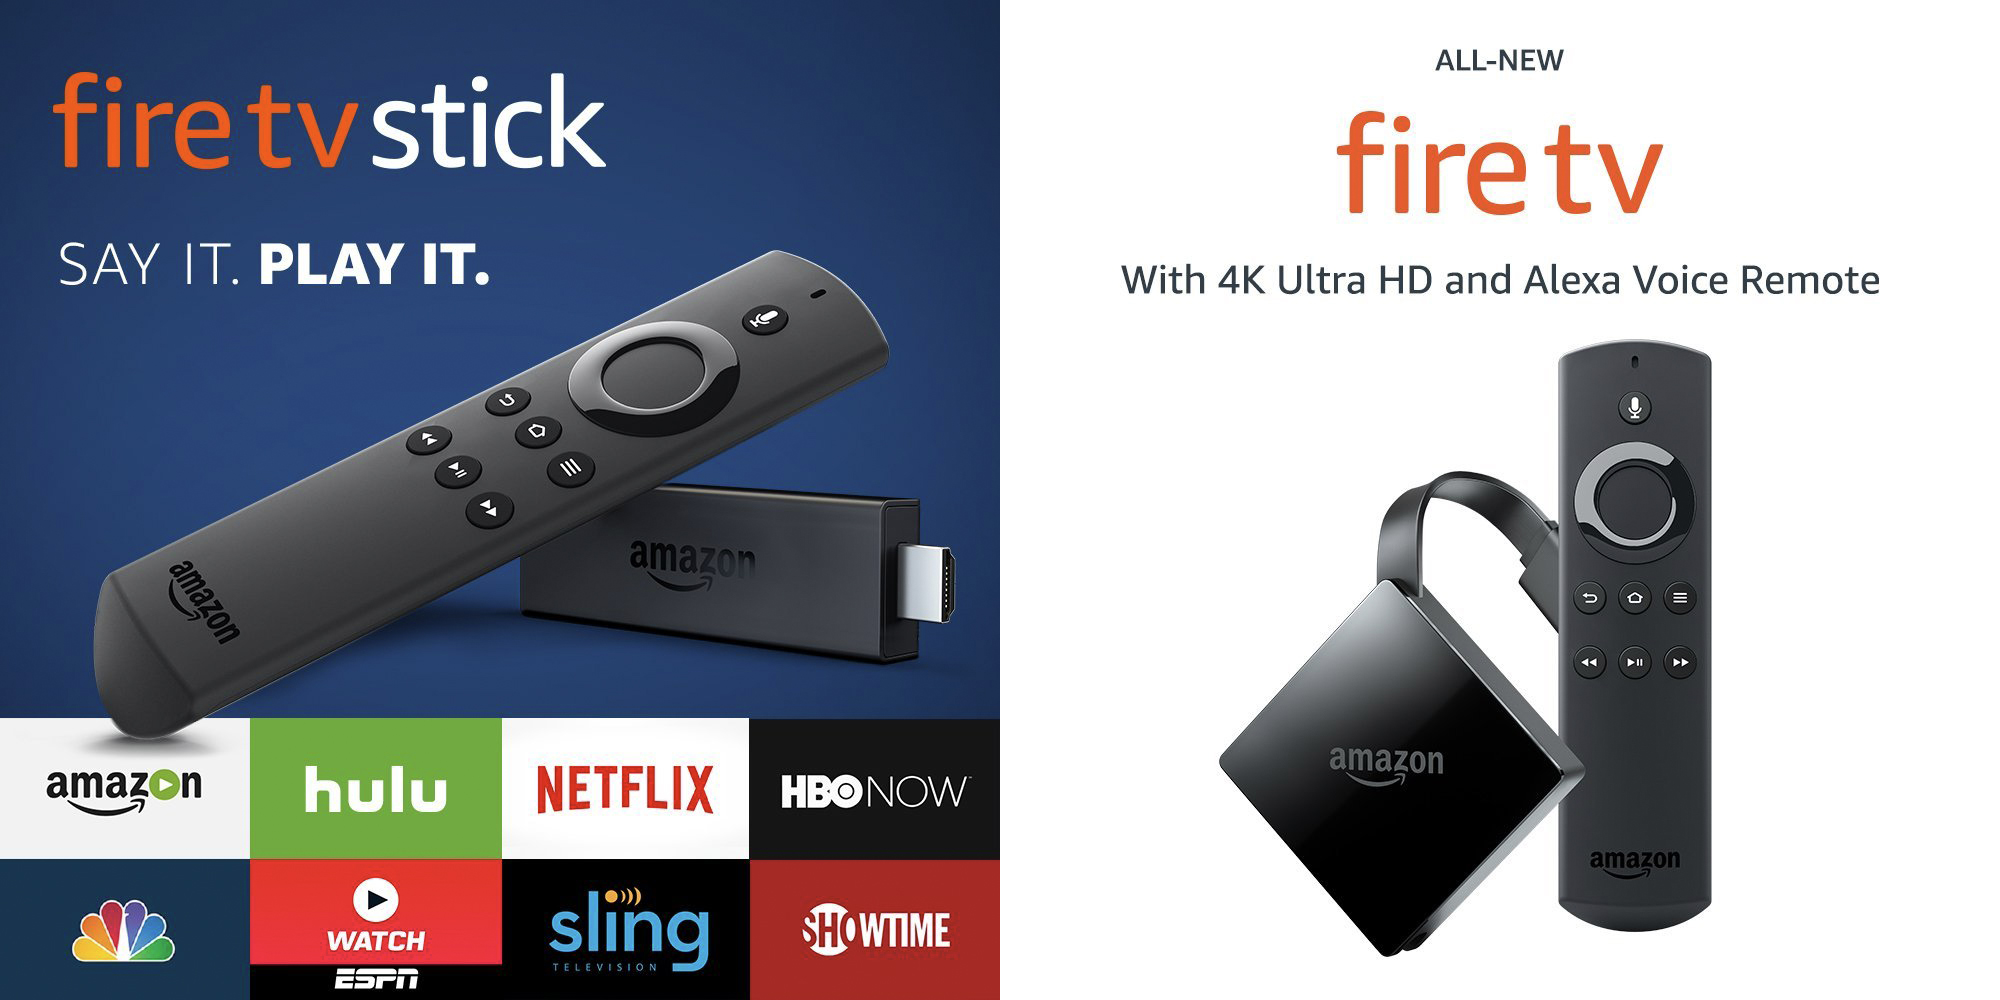 Huge deals on Amazon Fire TV Stick and 4K Ultra HD model from $20 today